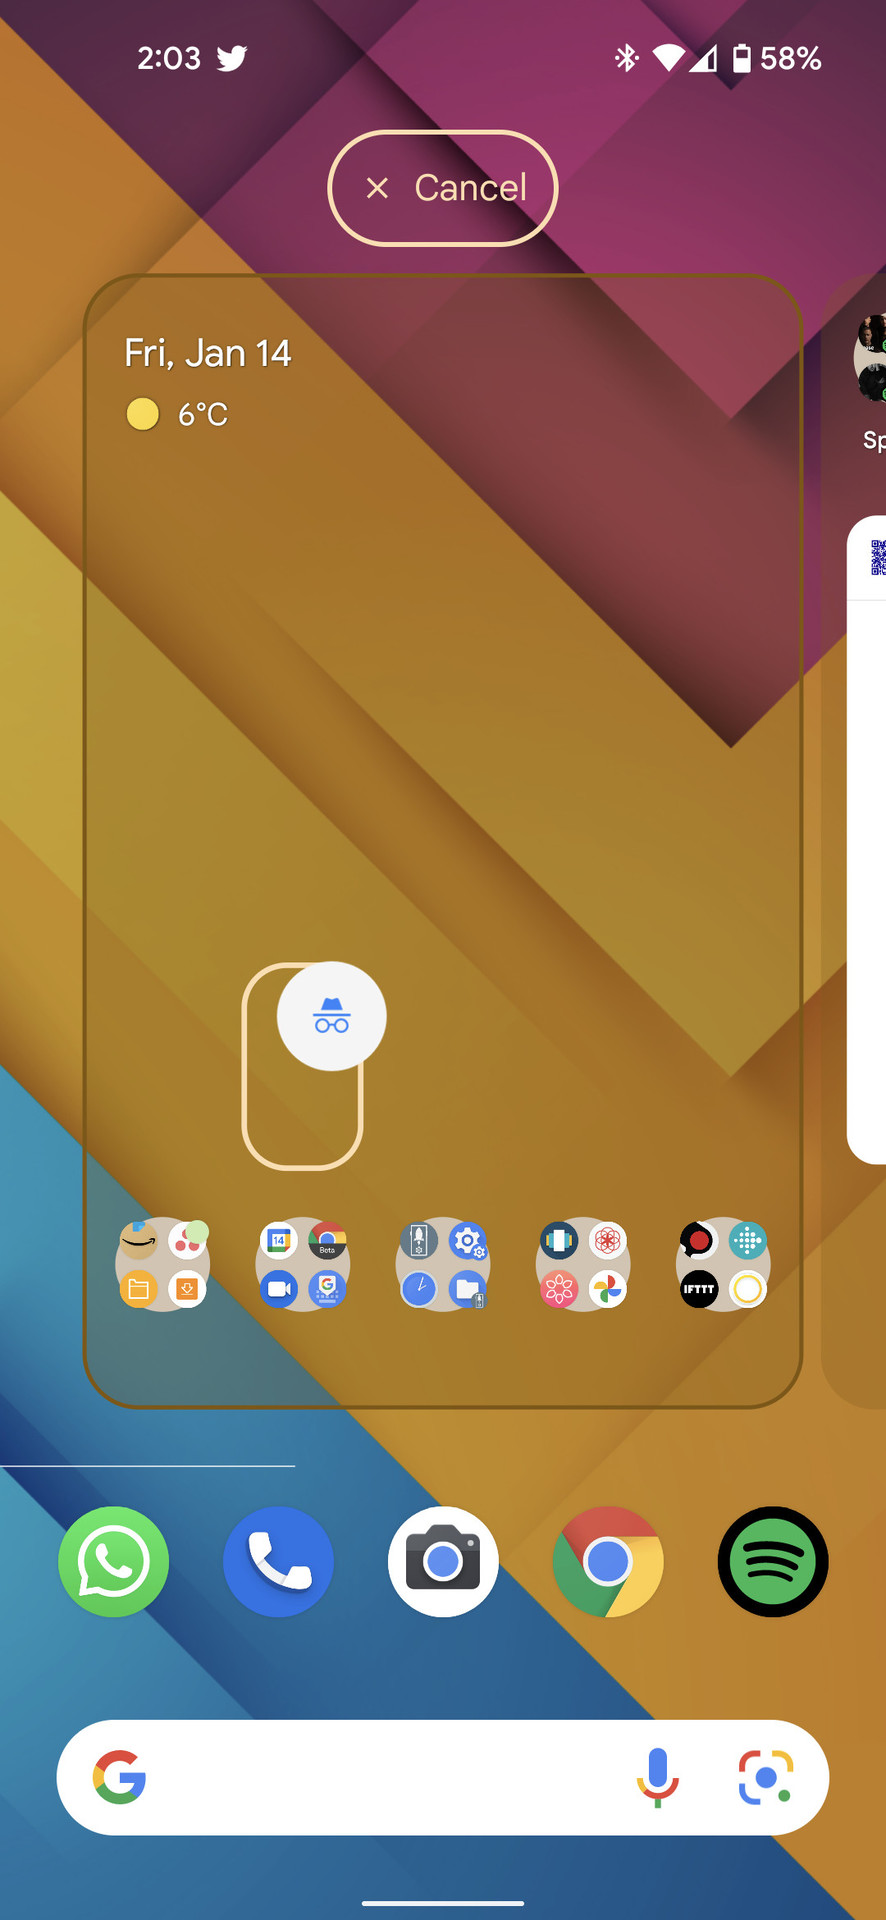 How to separate an app shortcut (new incognito tab) from the Chrome icon on the homescreen